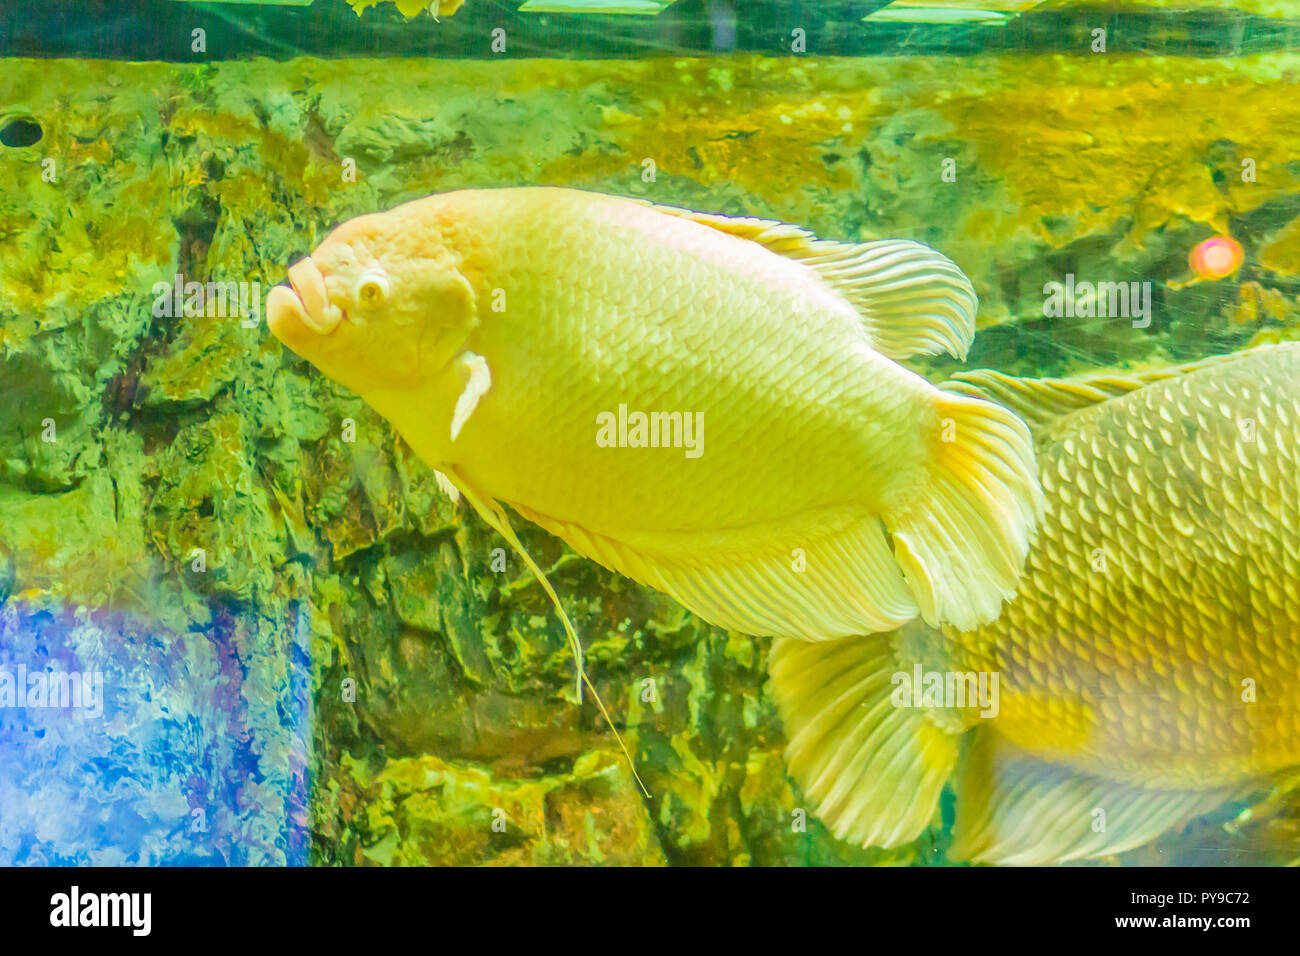 Albino giant gourami (Osphronemus goramy) fish, large gourami native to Southeast Asia. It lives in fresh or brackish water, particularly slow-moving  Stock Photo